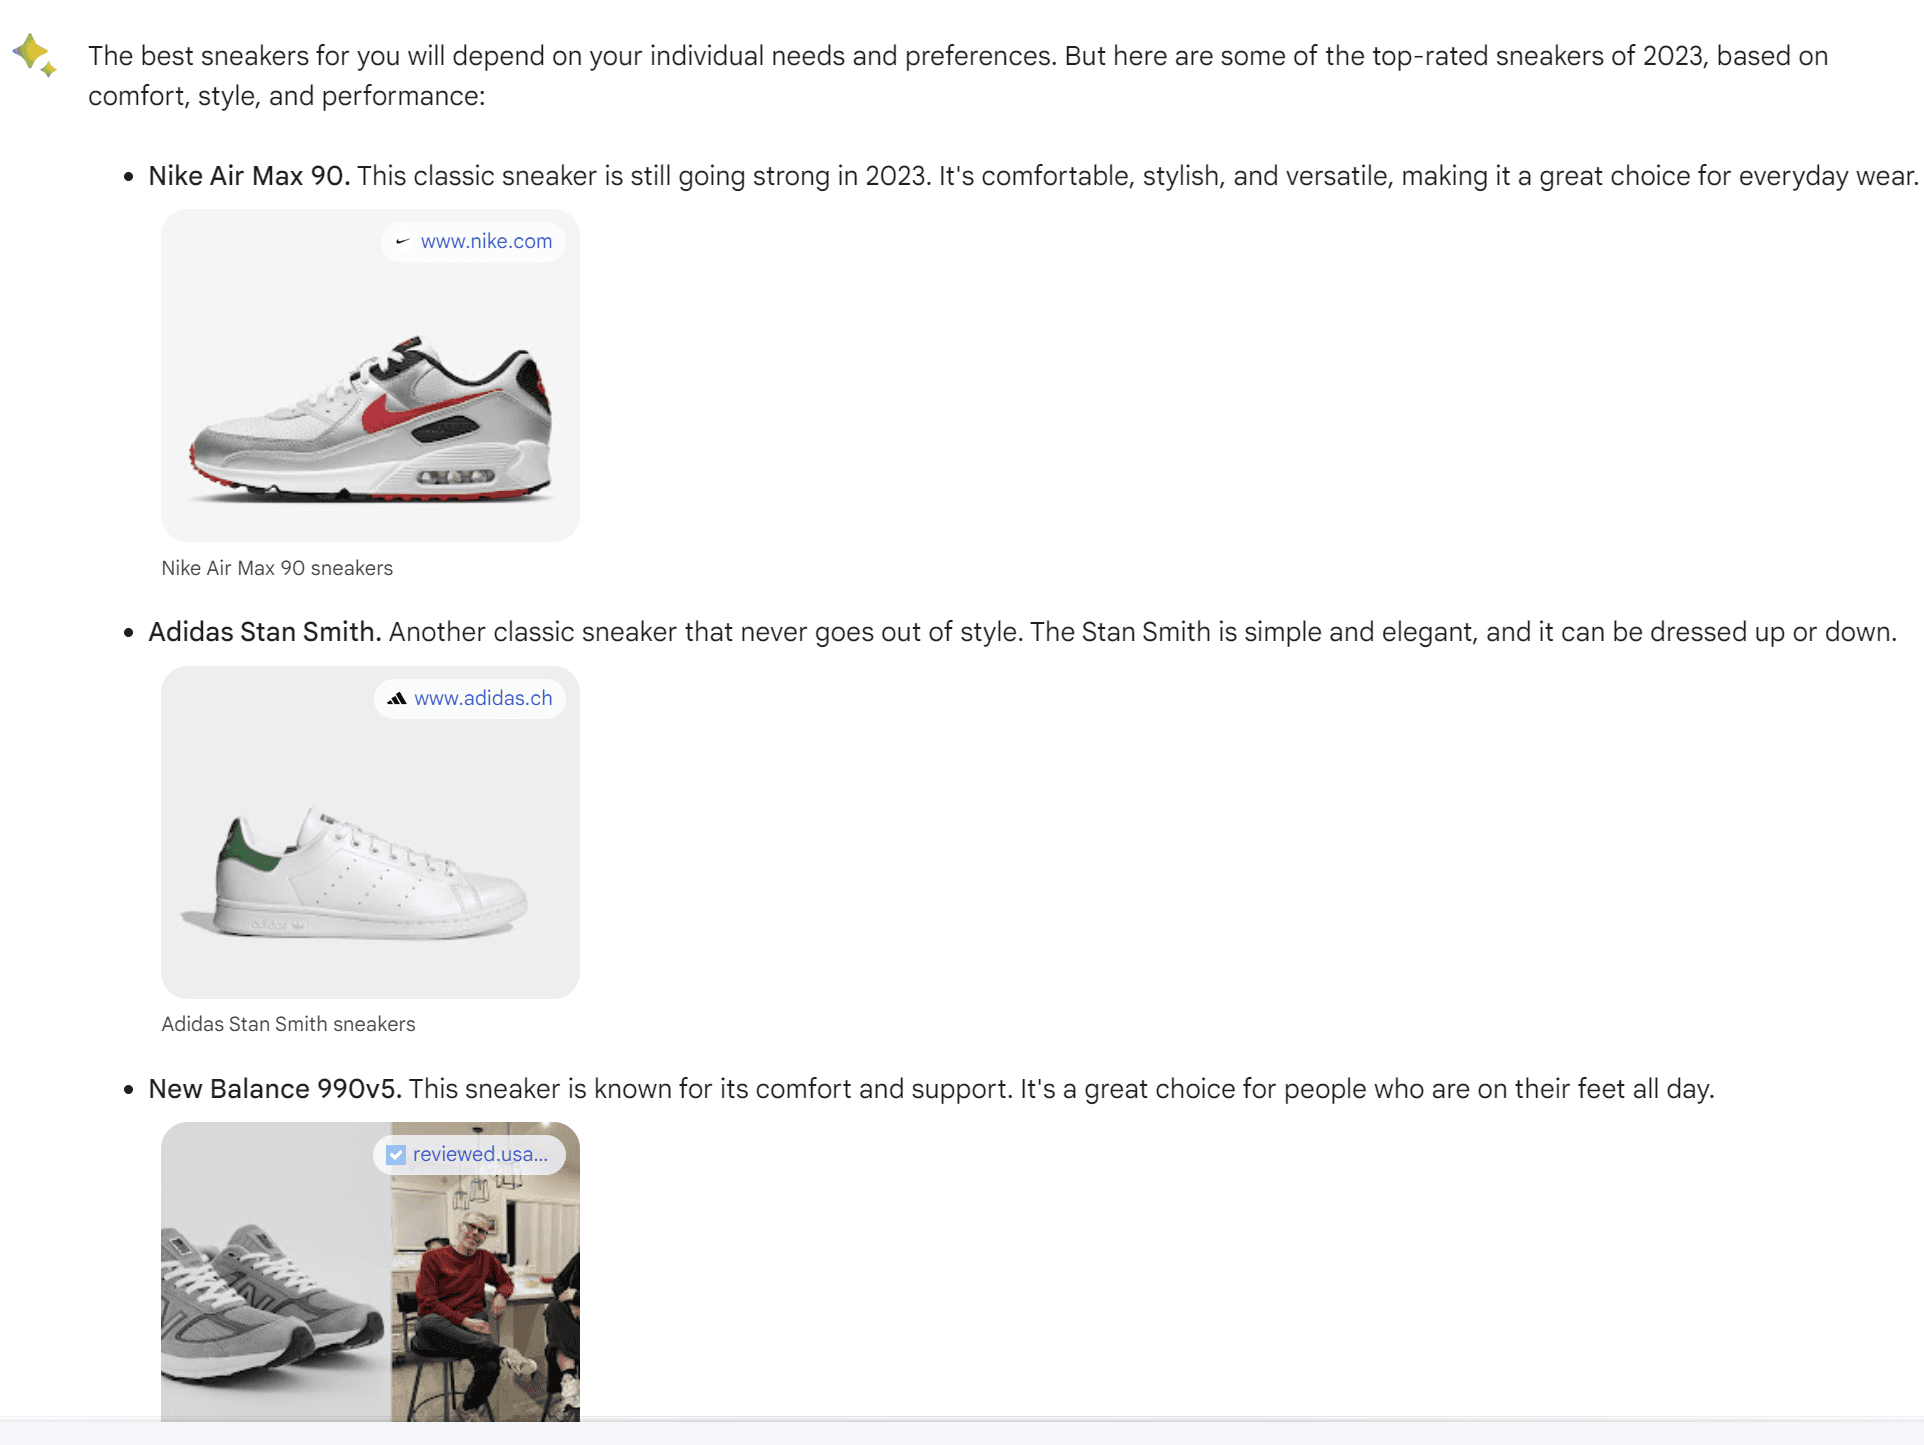 Chatbot answer for the query 'Best Sneakers'